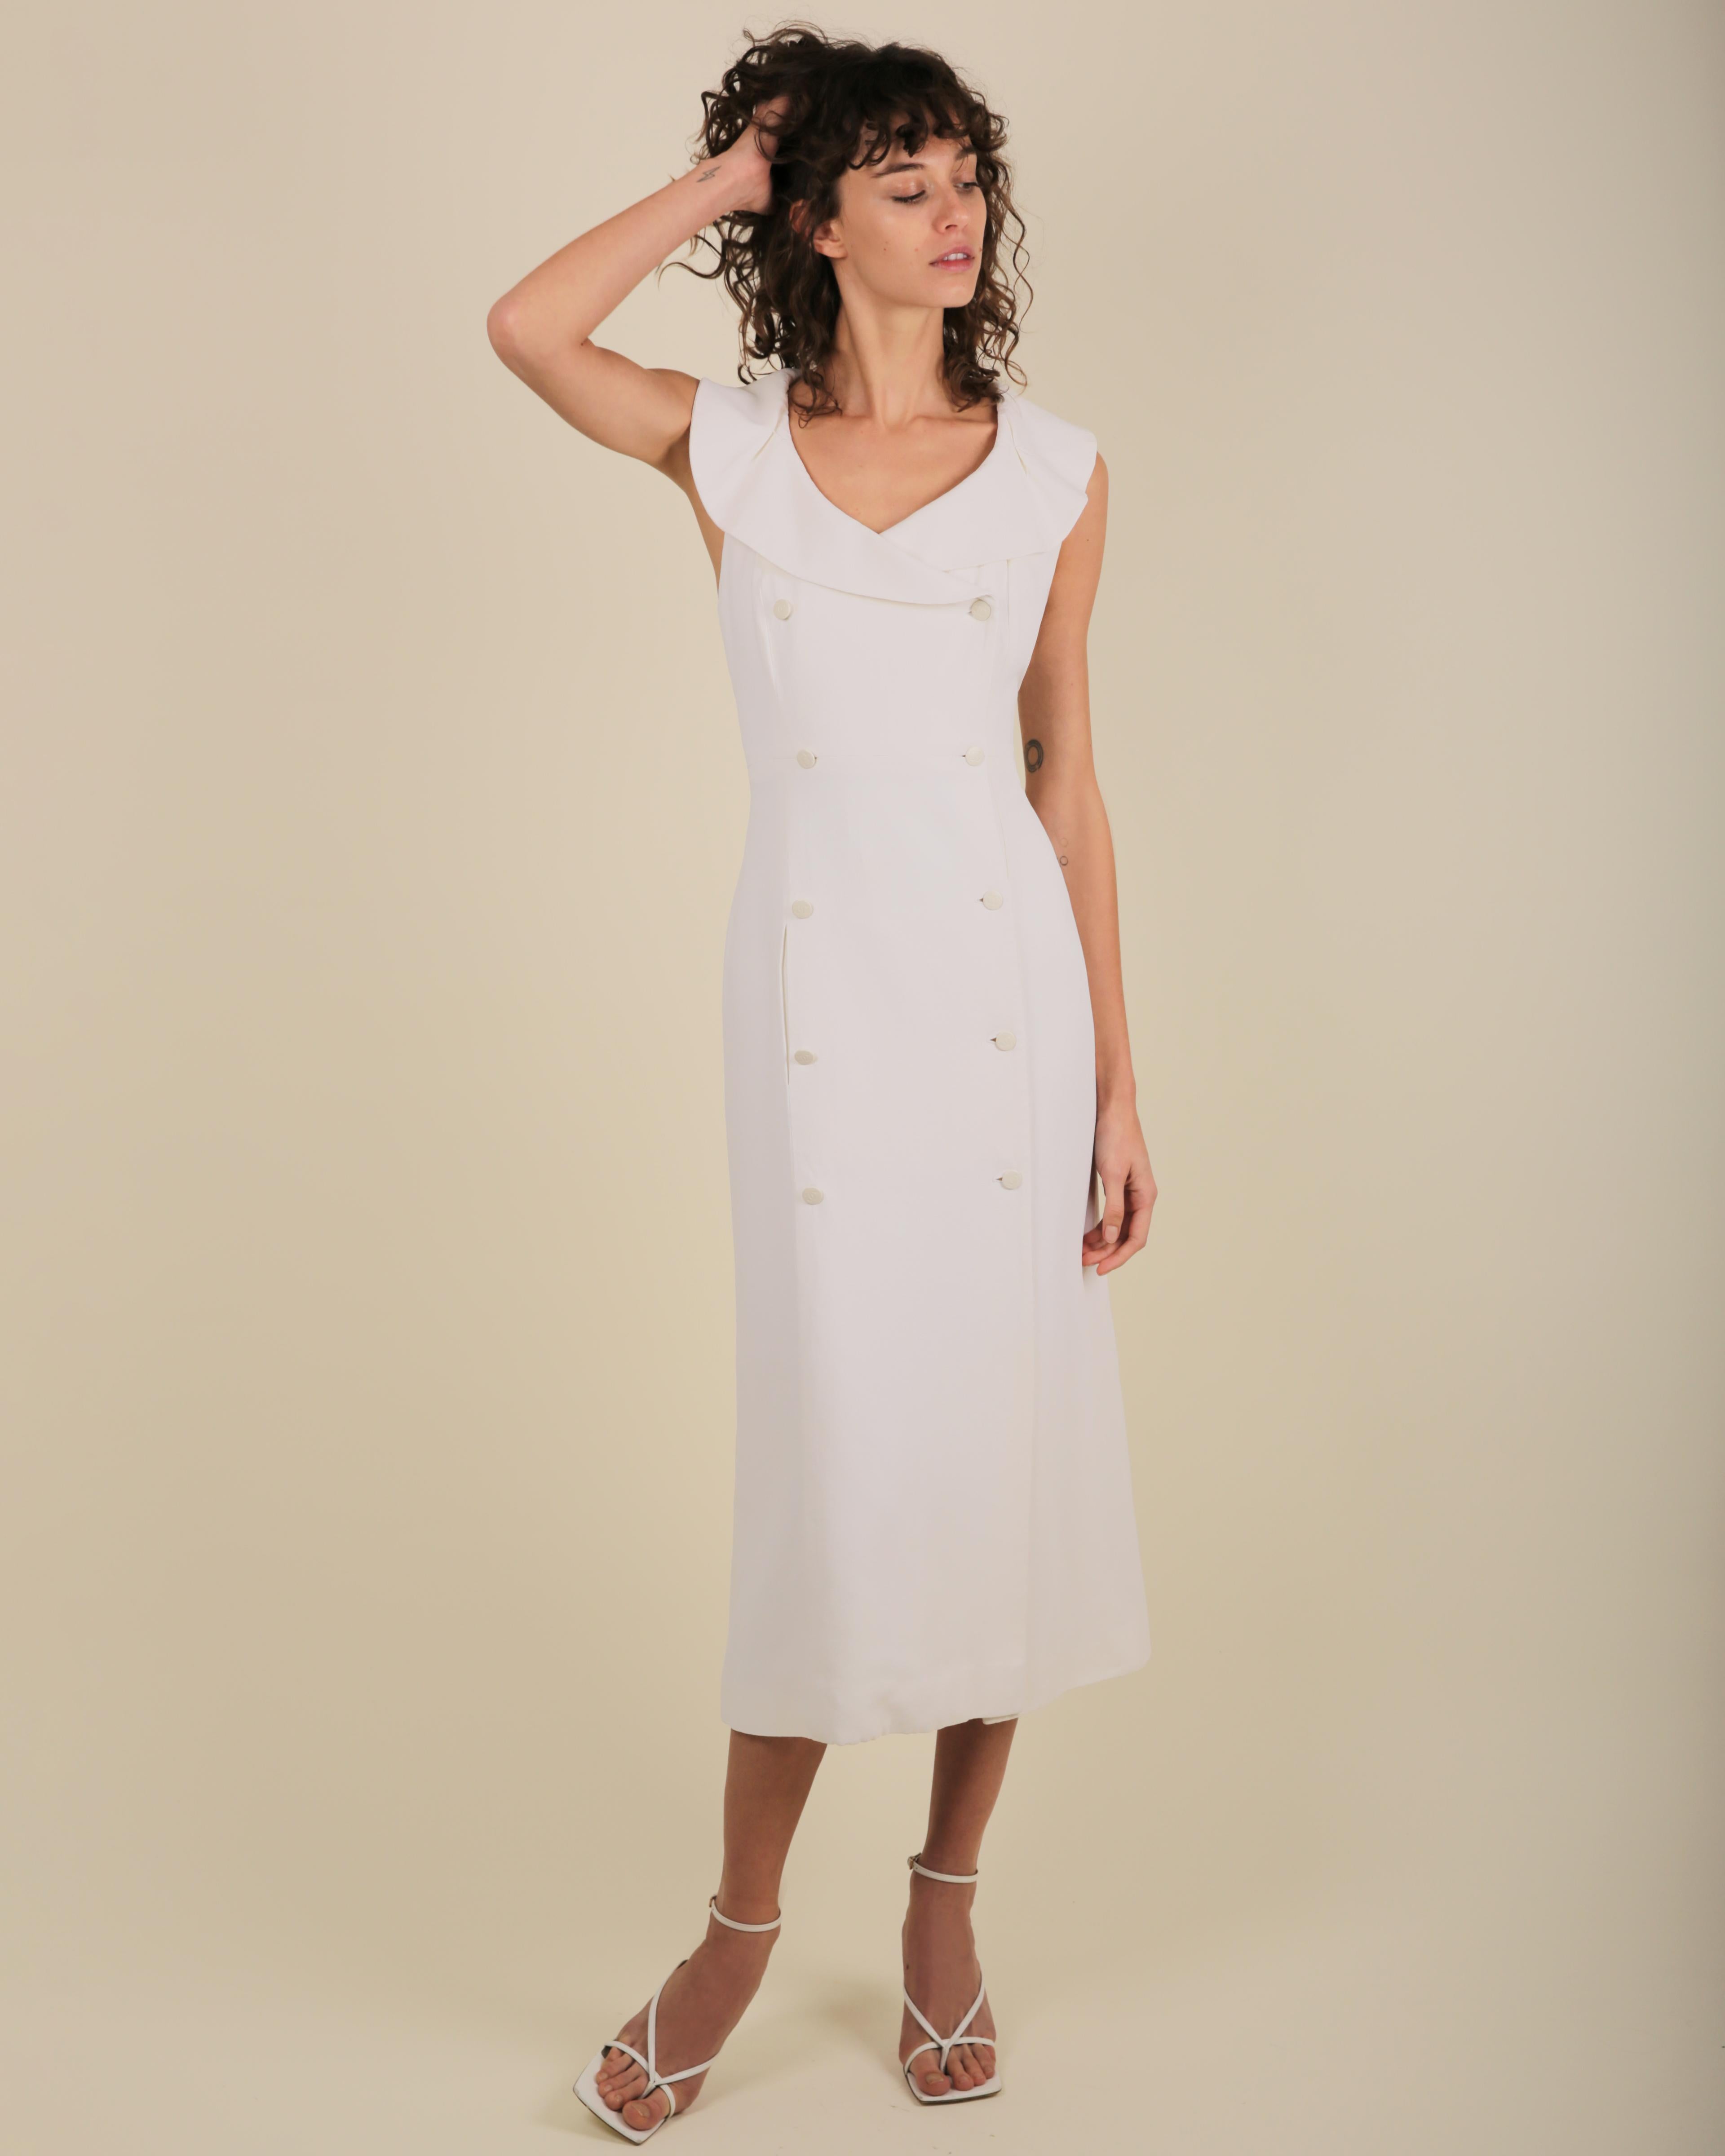 White Chanel cruise 1997 vintage white wedding midi dress with logo button up front   For Sale